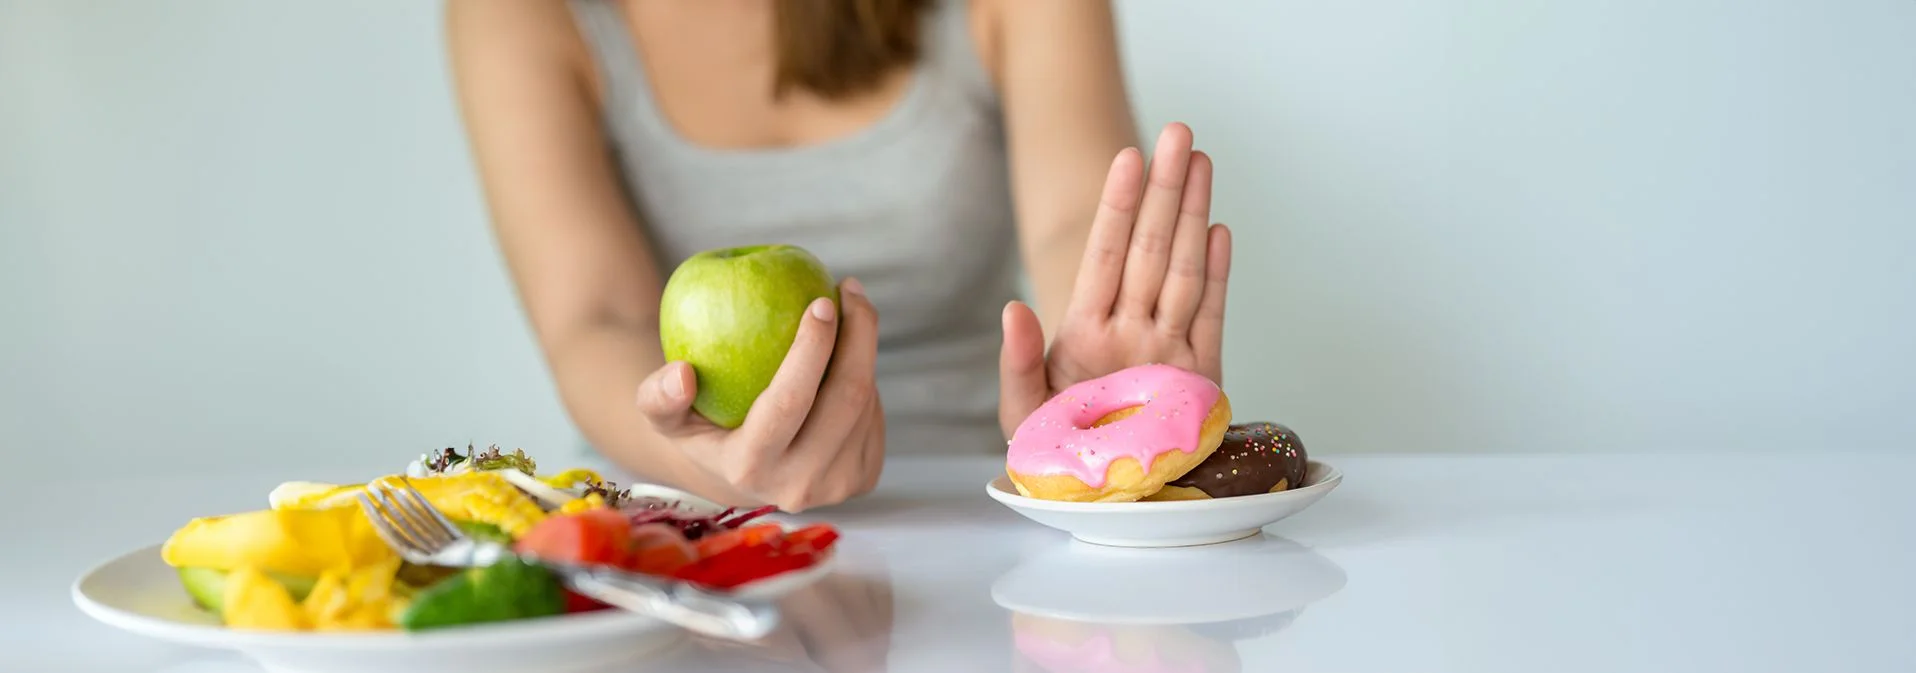 A woman holding an apple and pushing away a plate of donuts